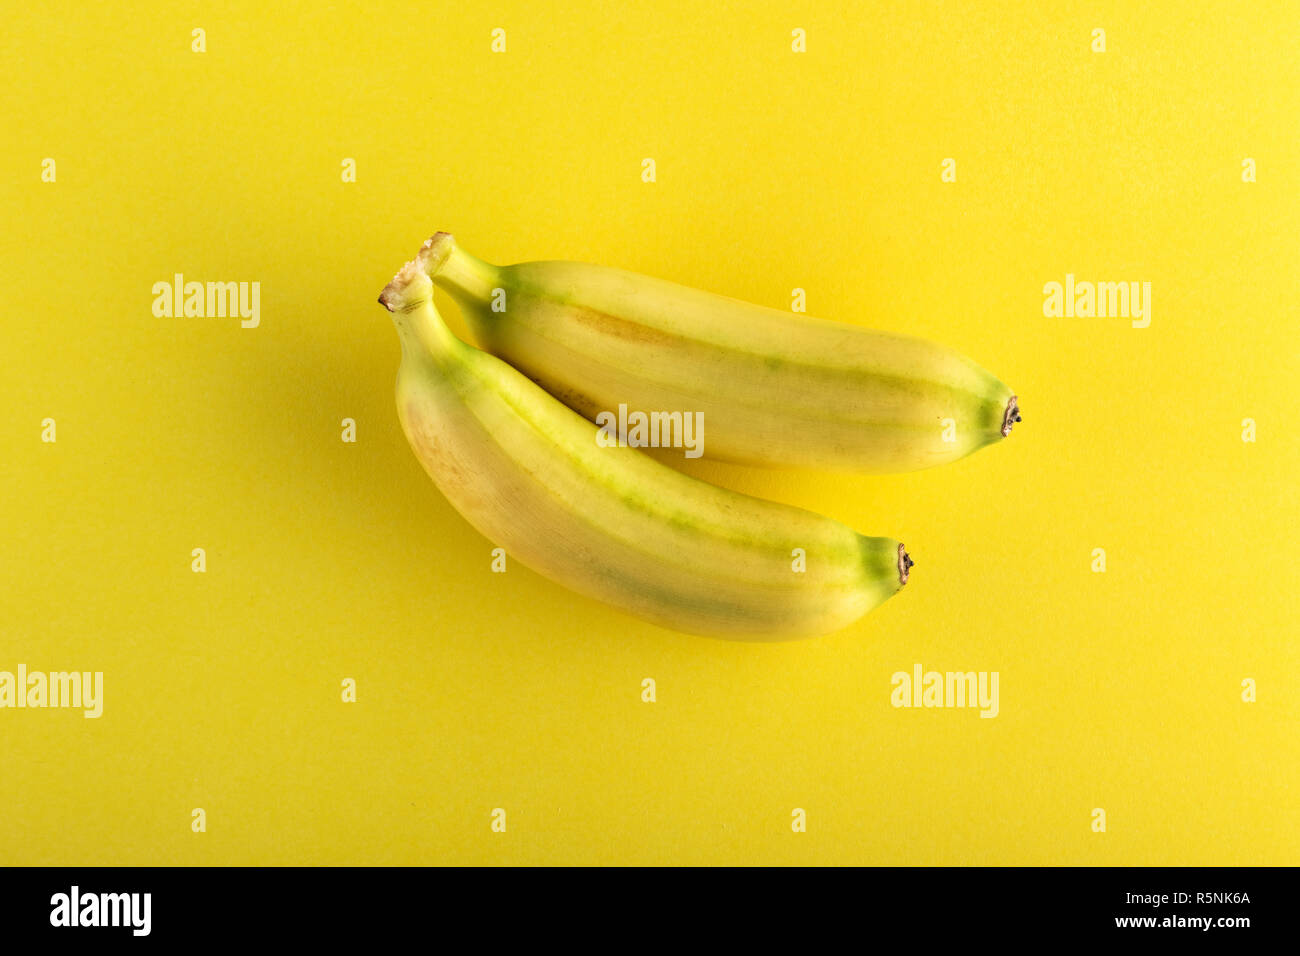 Two small whole bananas viewed from above isolated on yellow background Stock Photo